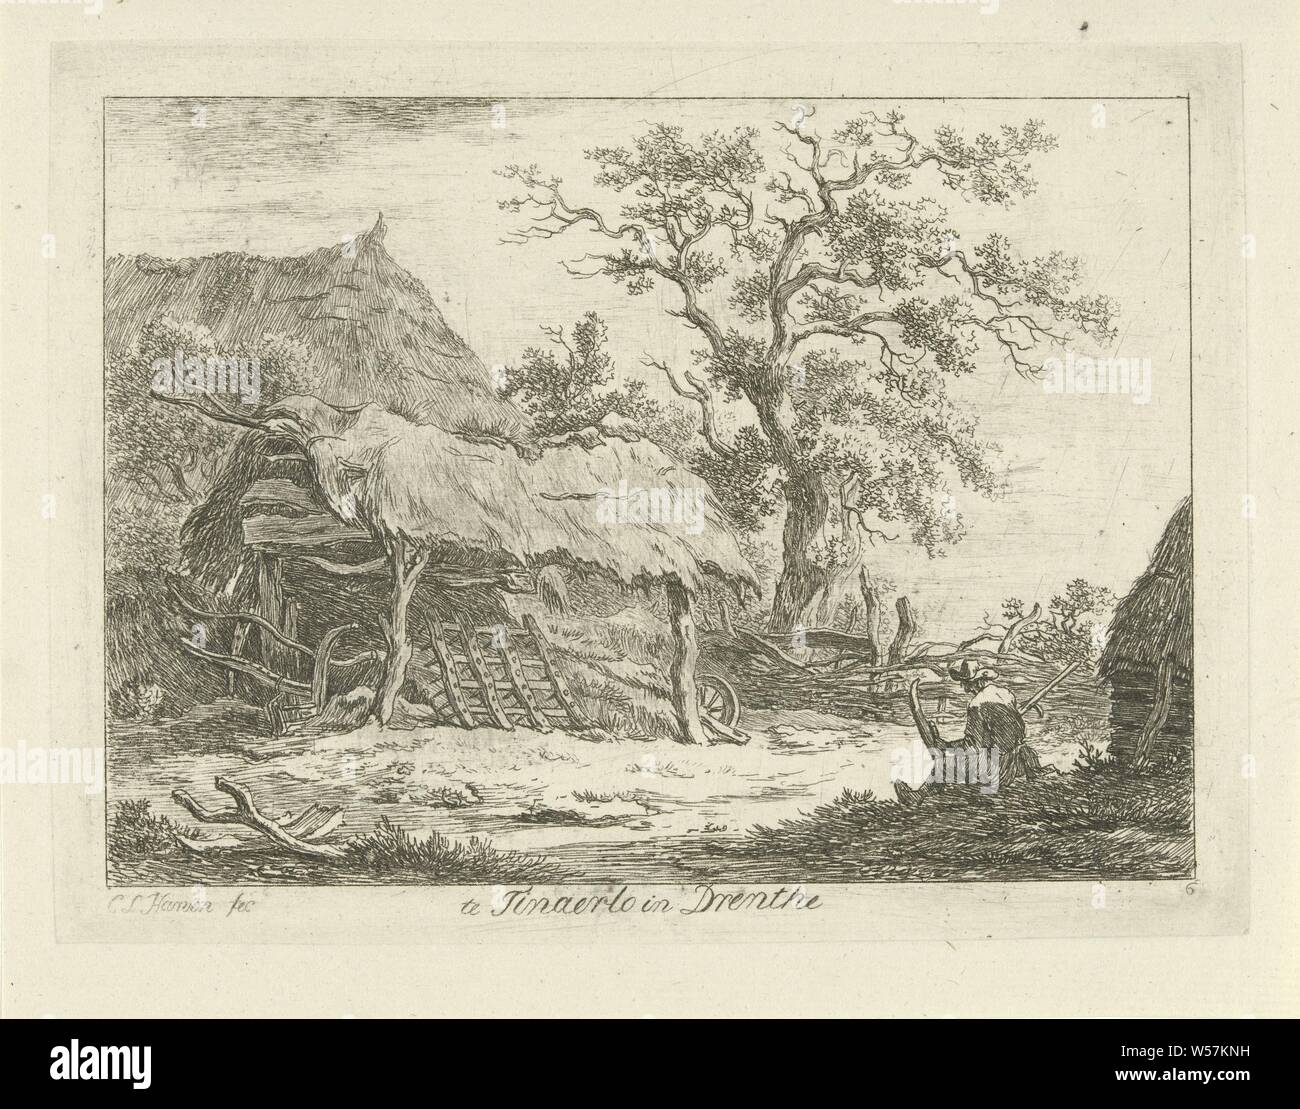 Sitting figure at a barn in Tinaerlo in Drenthe (title on object) Landscapes (1-6) (series title), barn, farm or solitary house in landscape with figures, staffage), agricultural implements: harrow, Tynaarlo, Carel Lodewijk Hansen (mentioned on object), Netherlands, c. 1780 - 1840, paper, etching, h 142 mm × w 188 mm Stock Photo